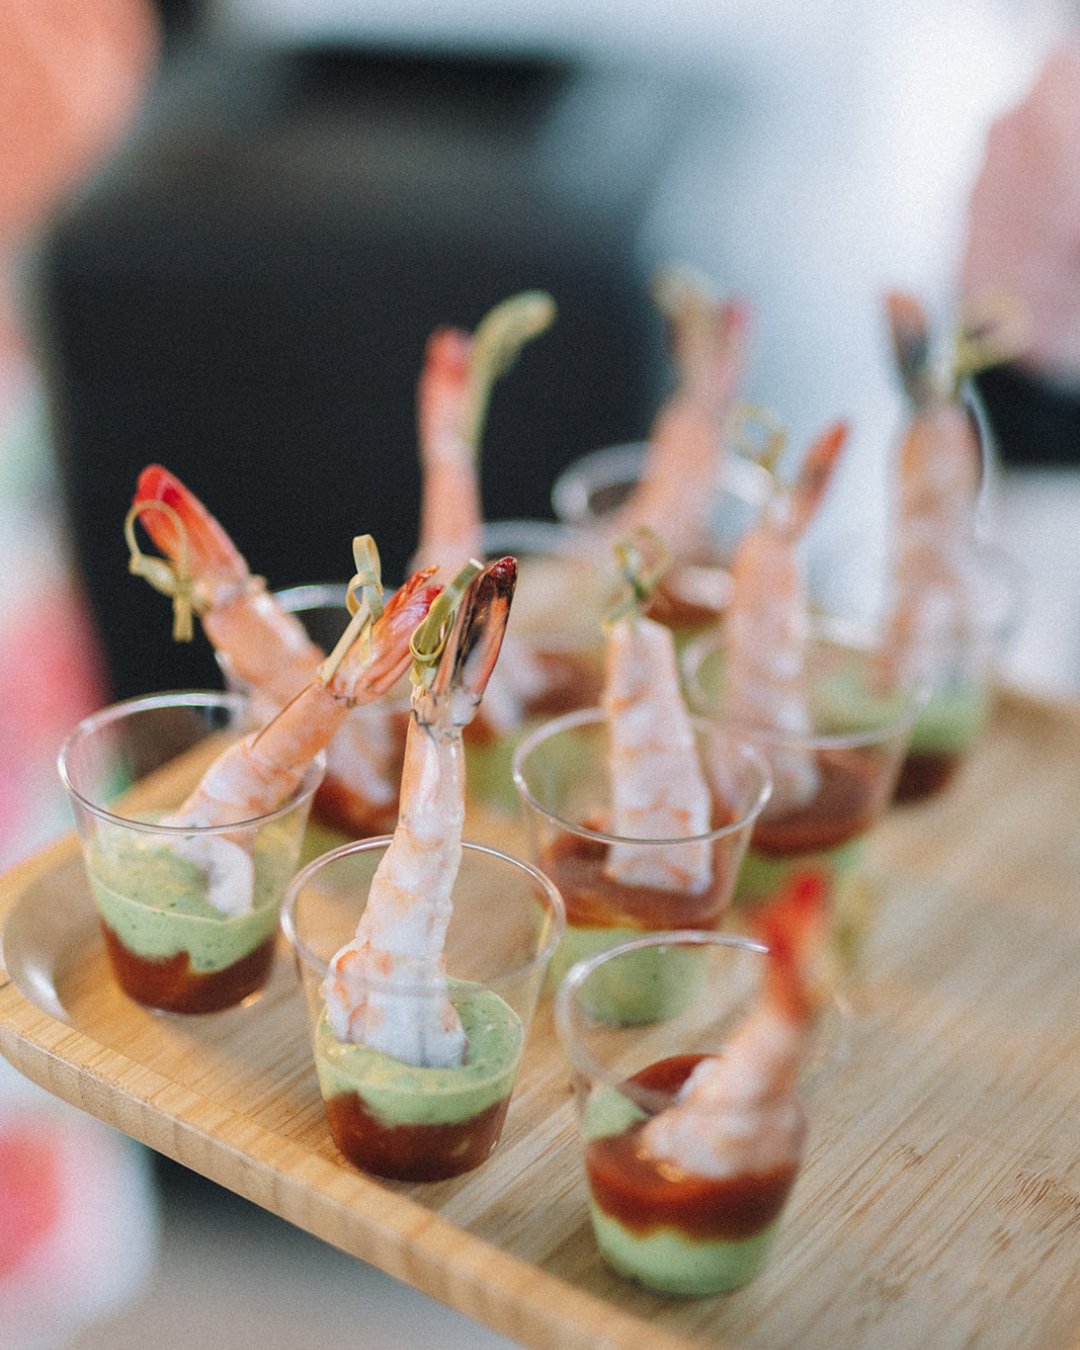 @SohoTaco brought the flavor &amp; flair to this poolside cocktail hour! Their mouthwatering hors d'oeuvres pair perfectly with a refreshing marg 🌮🍹⁣
Catering: @sohotaco⁣
Photo: @westimagery